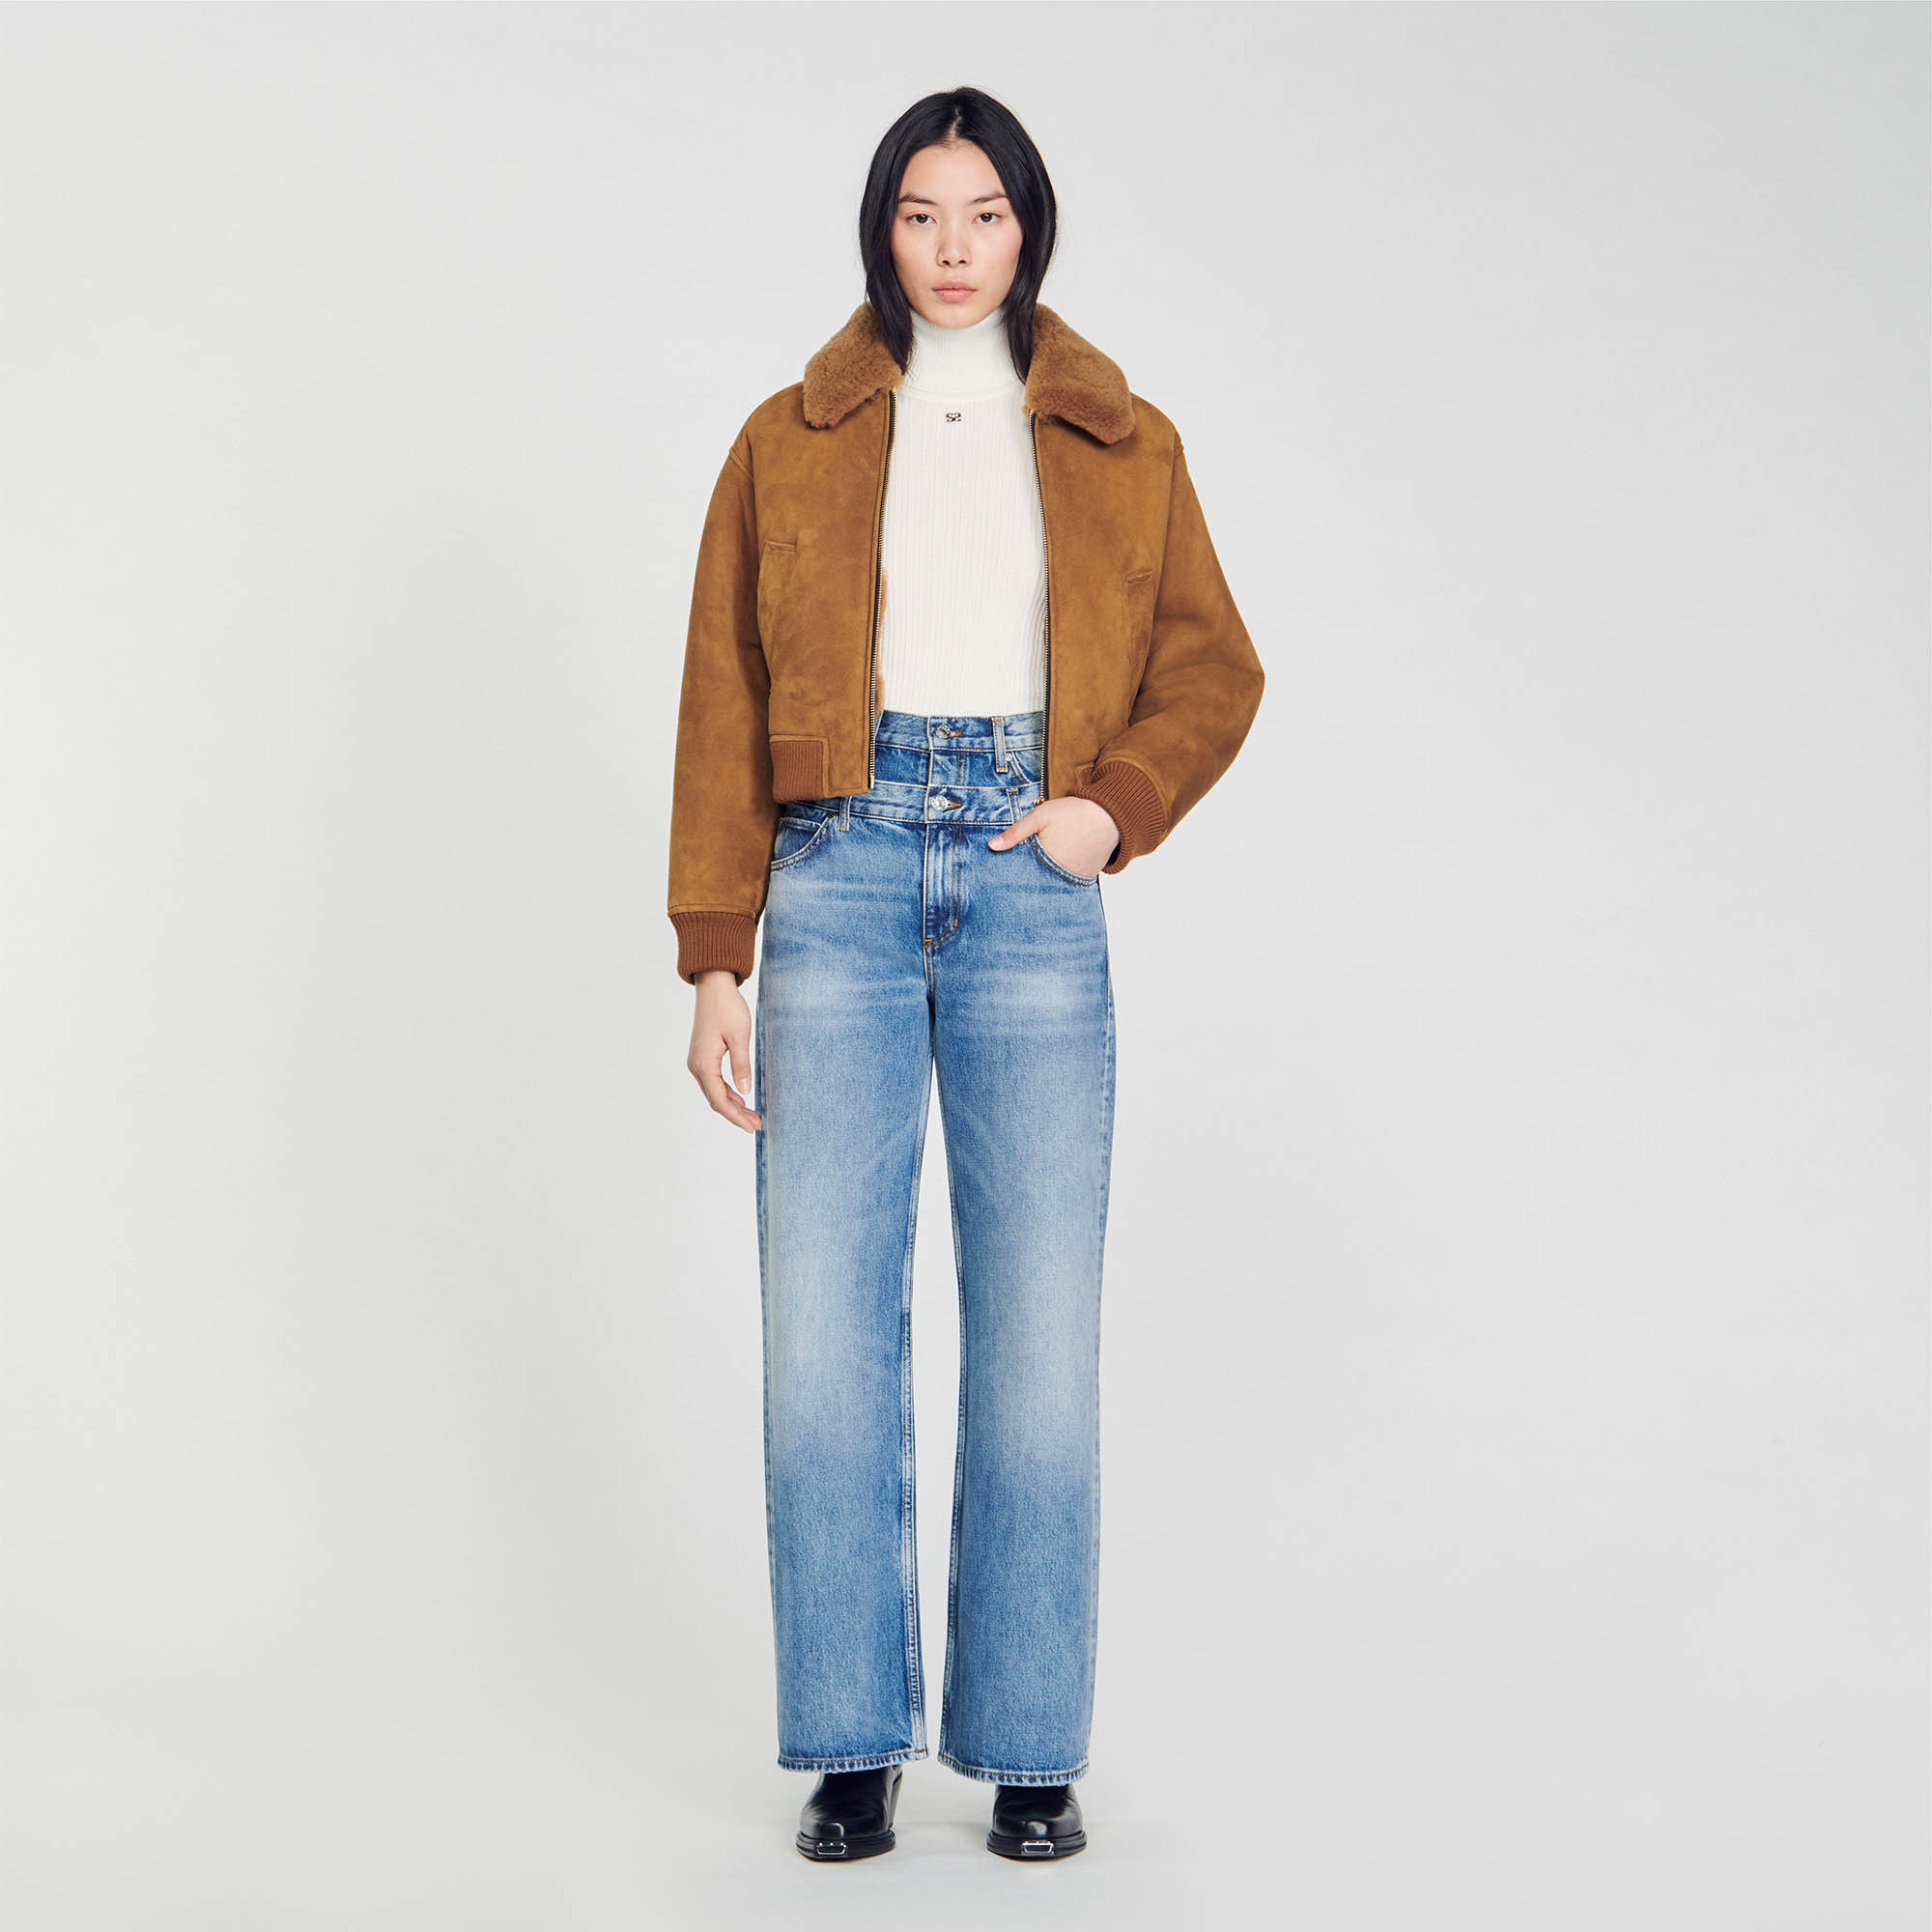 Sandro cotton Pocket lining: High-waisted straight-leg jeans with double belt and vintage-style wash